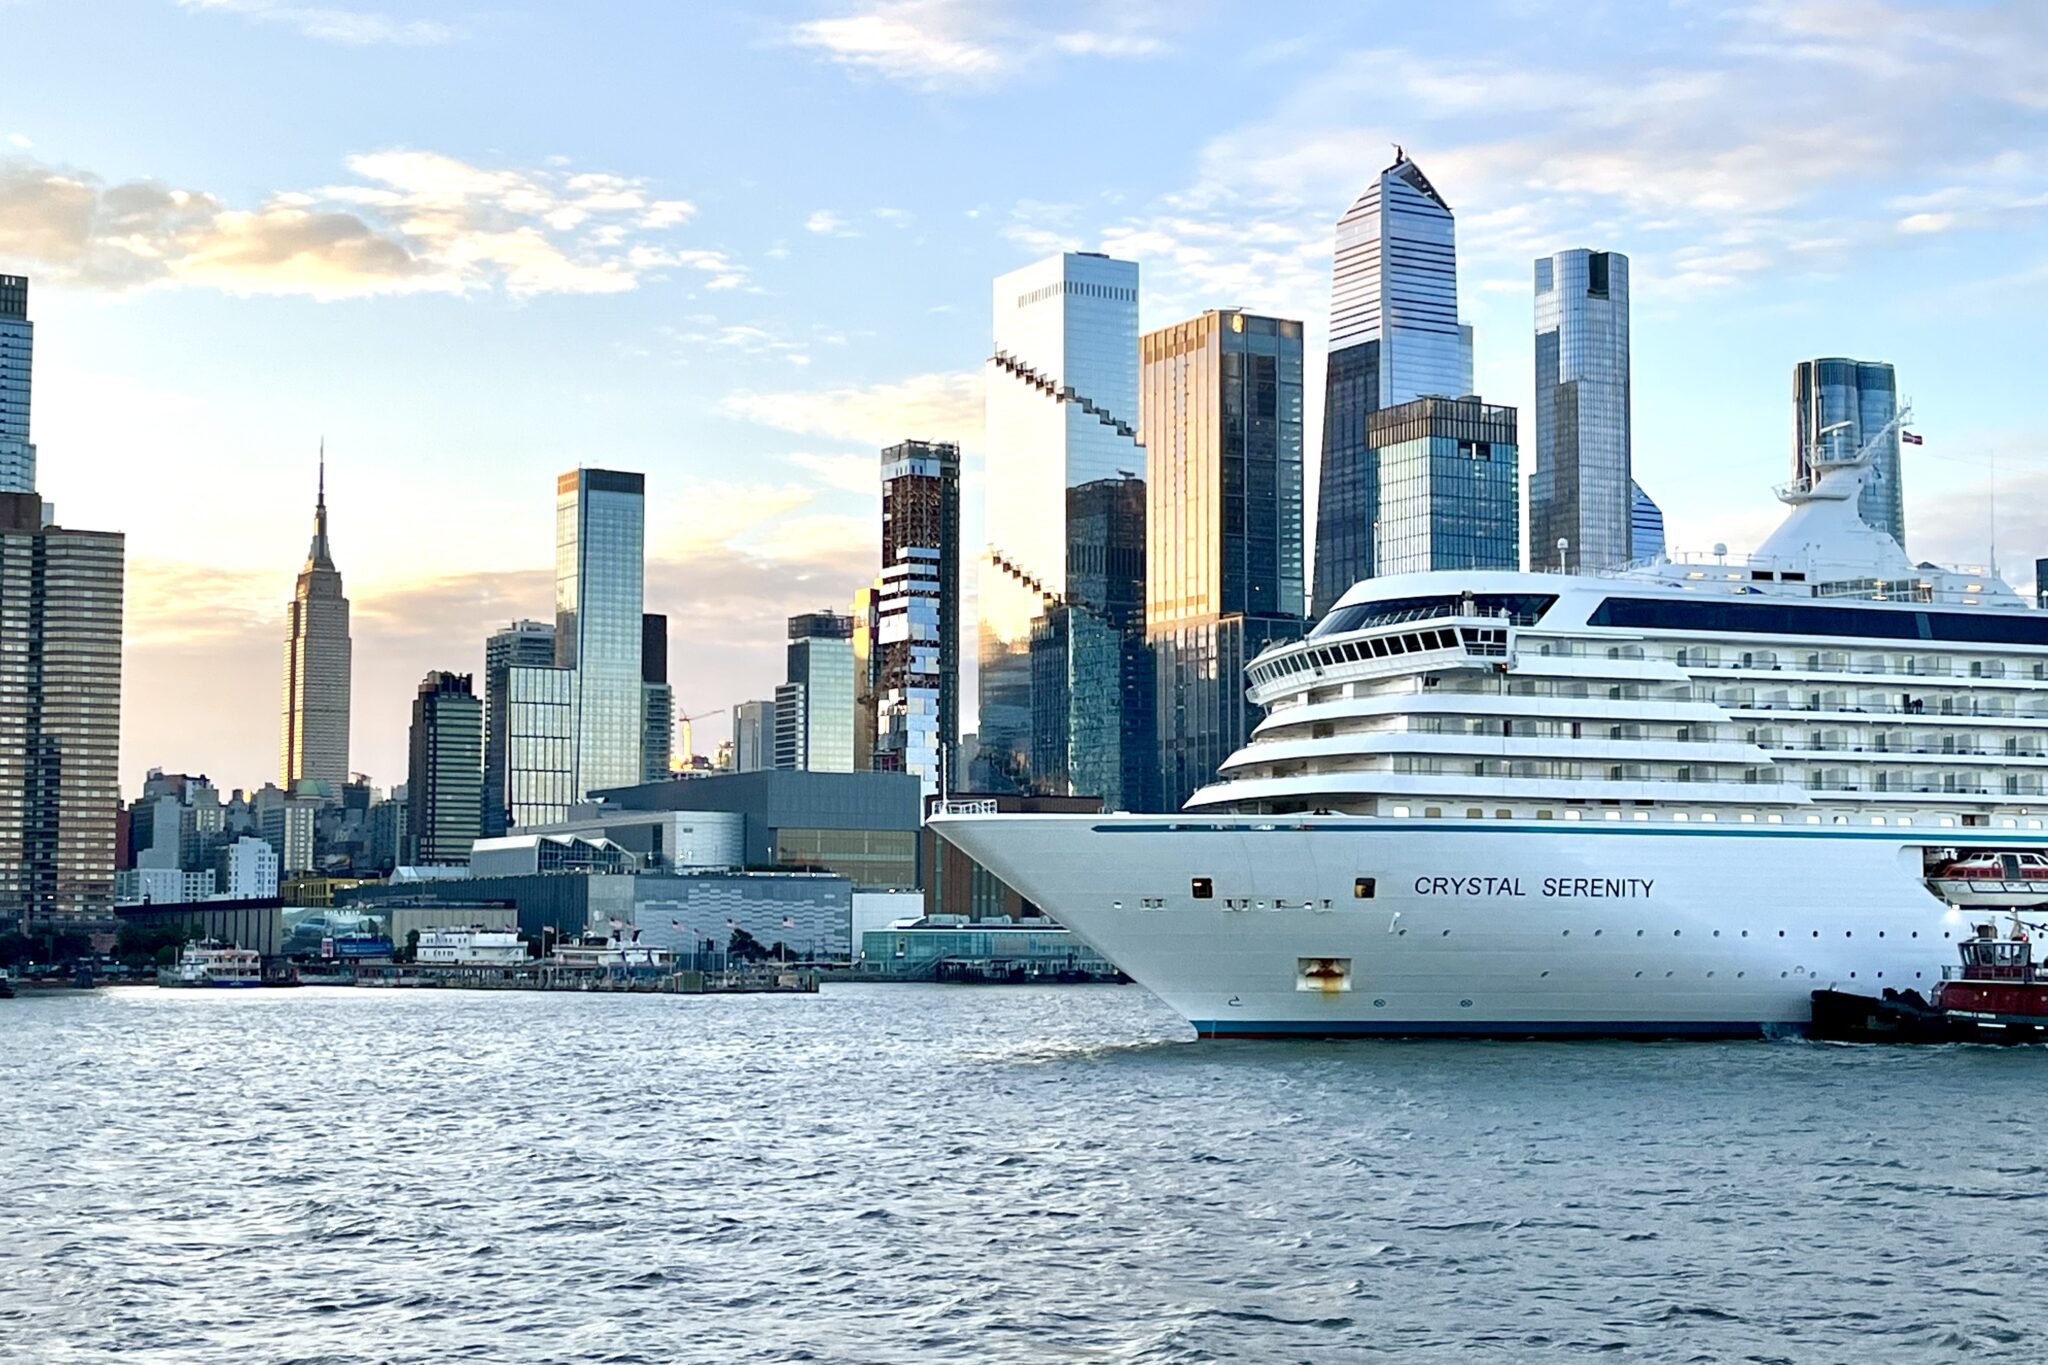 The Crystal Serenity cruises along the Hudson River in New York City. 